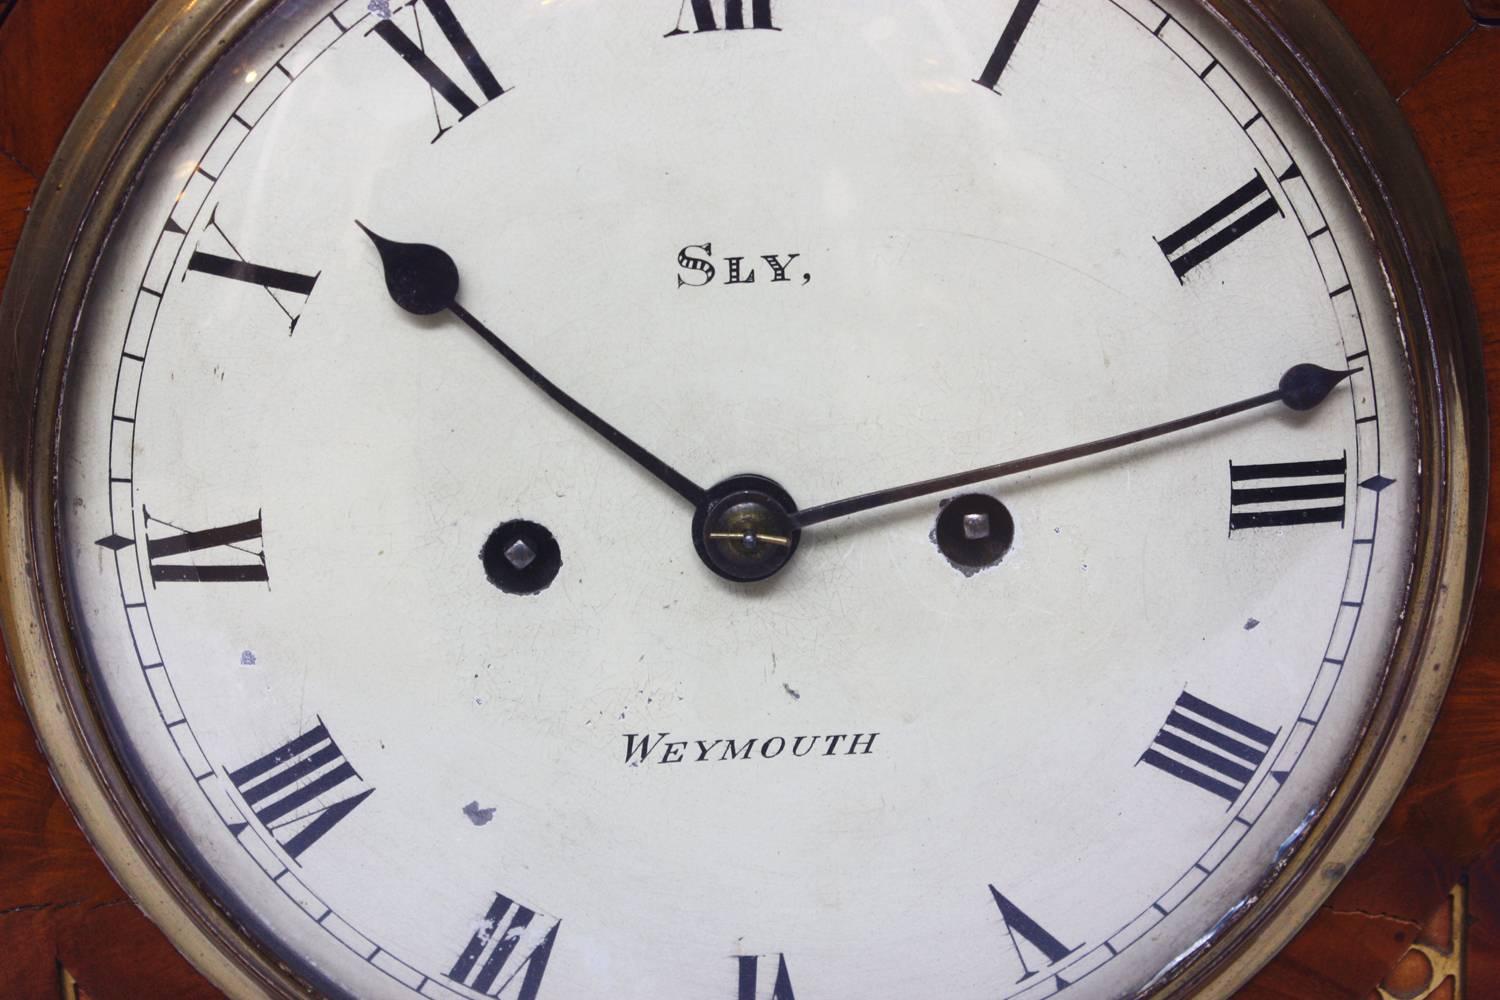 George II Mahogany Arched-Top Bracket Clock by Sly, Weymouth, England In Good Condition For Sale In Dallas, TX